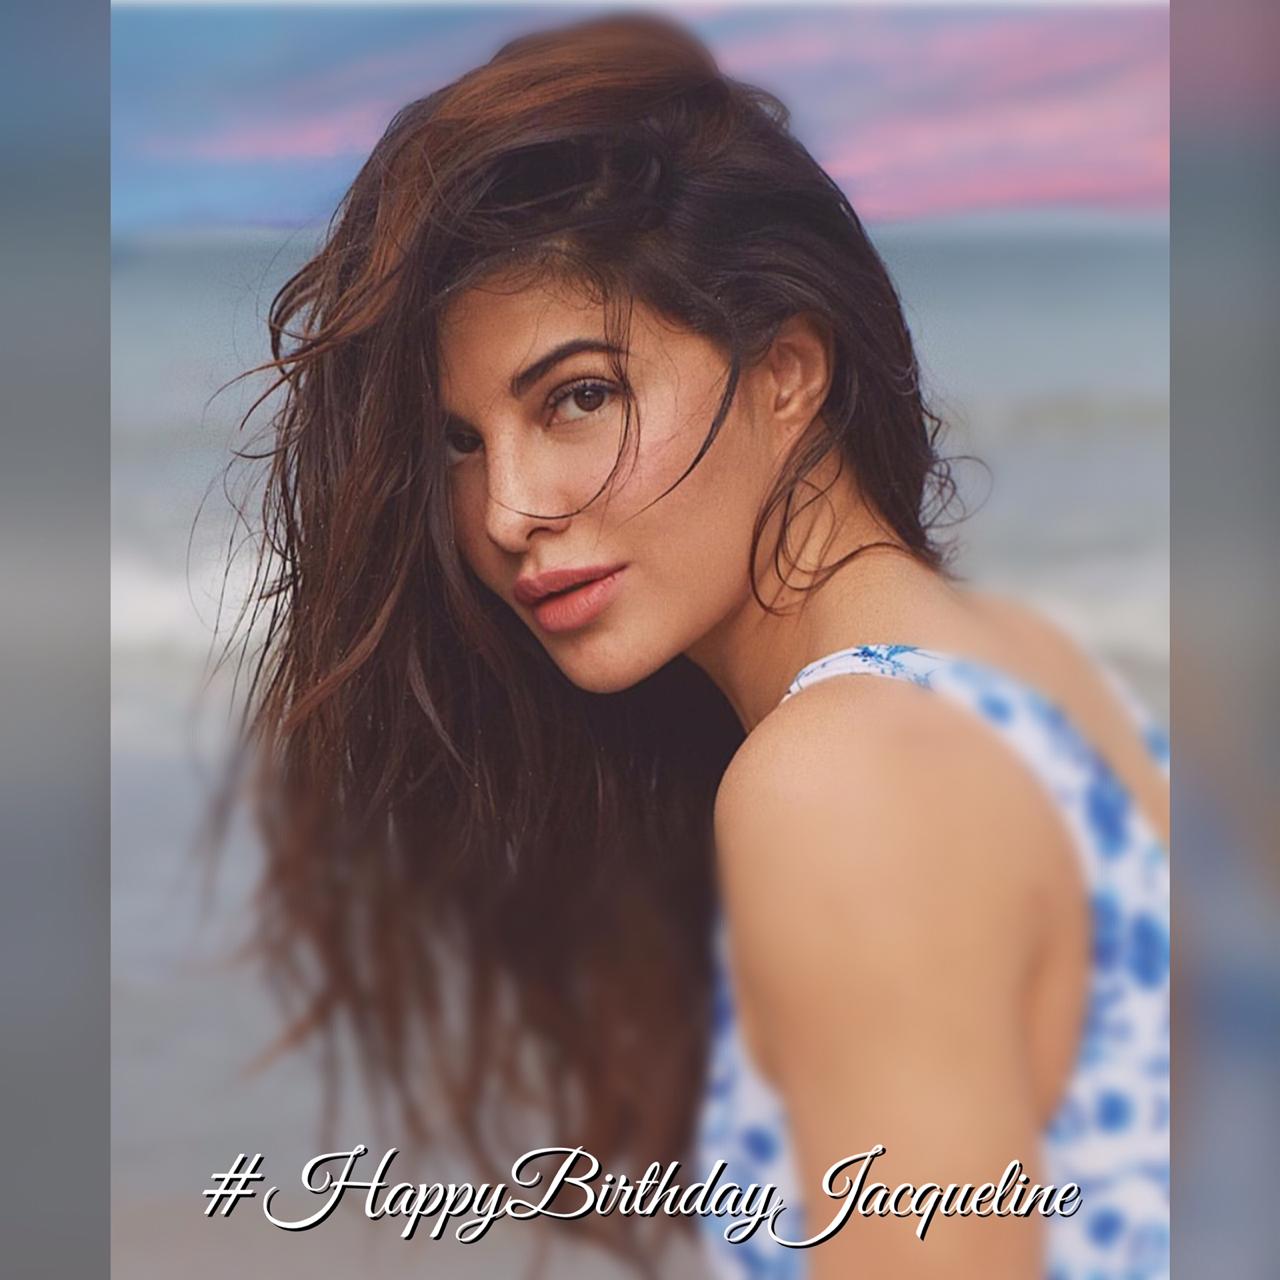 A very happy birthday Jacqueline Fernandez. Sending you lots of love and happiness 